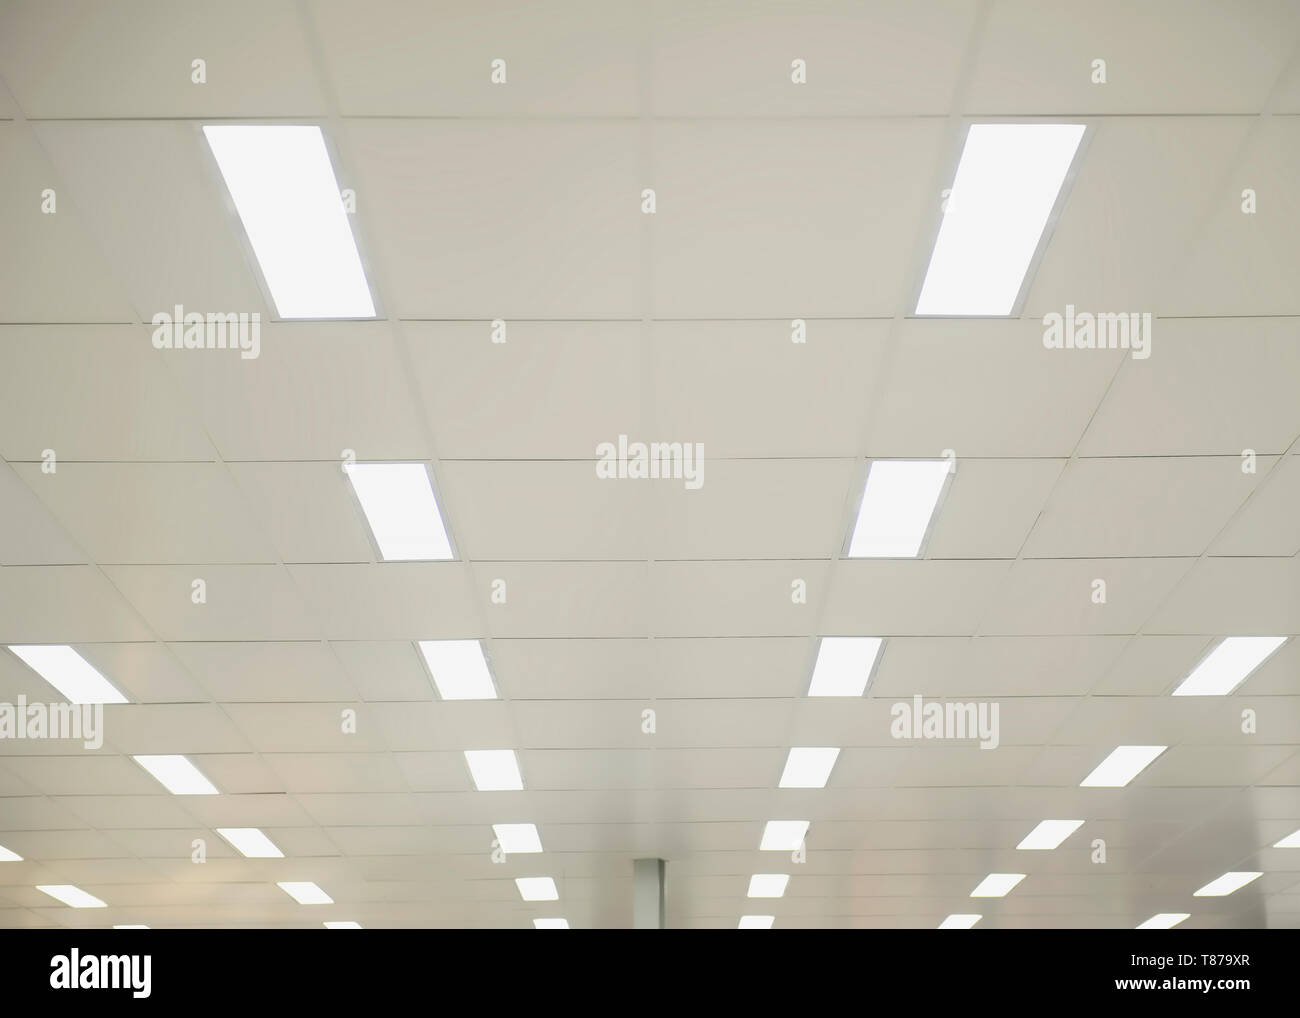 Suspended Ceiling Lights Stock Photo 246023871 Alamy